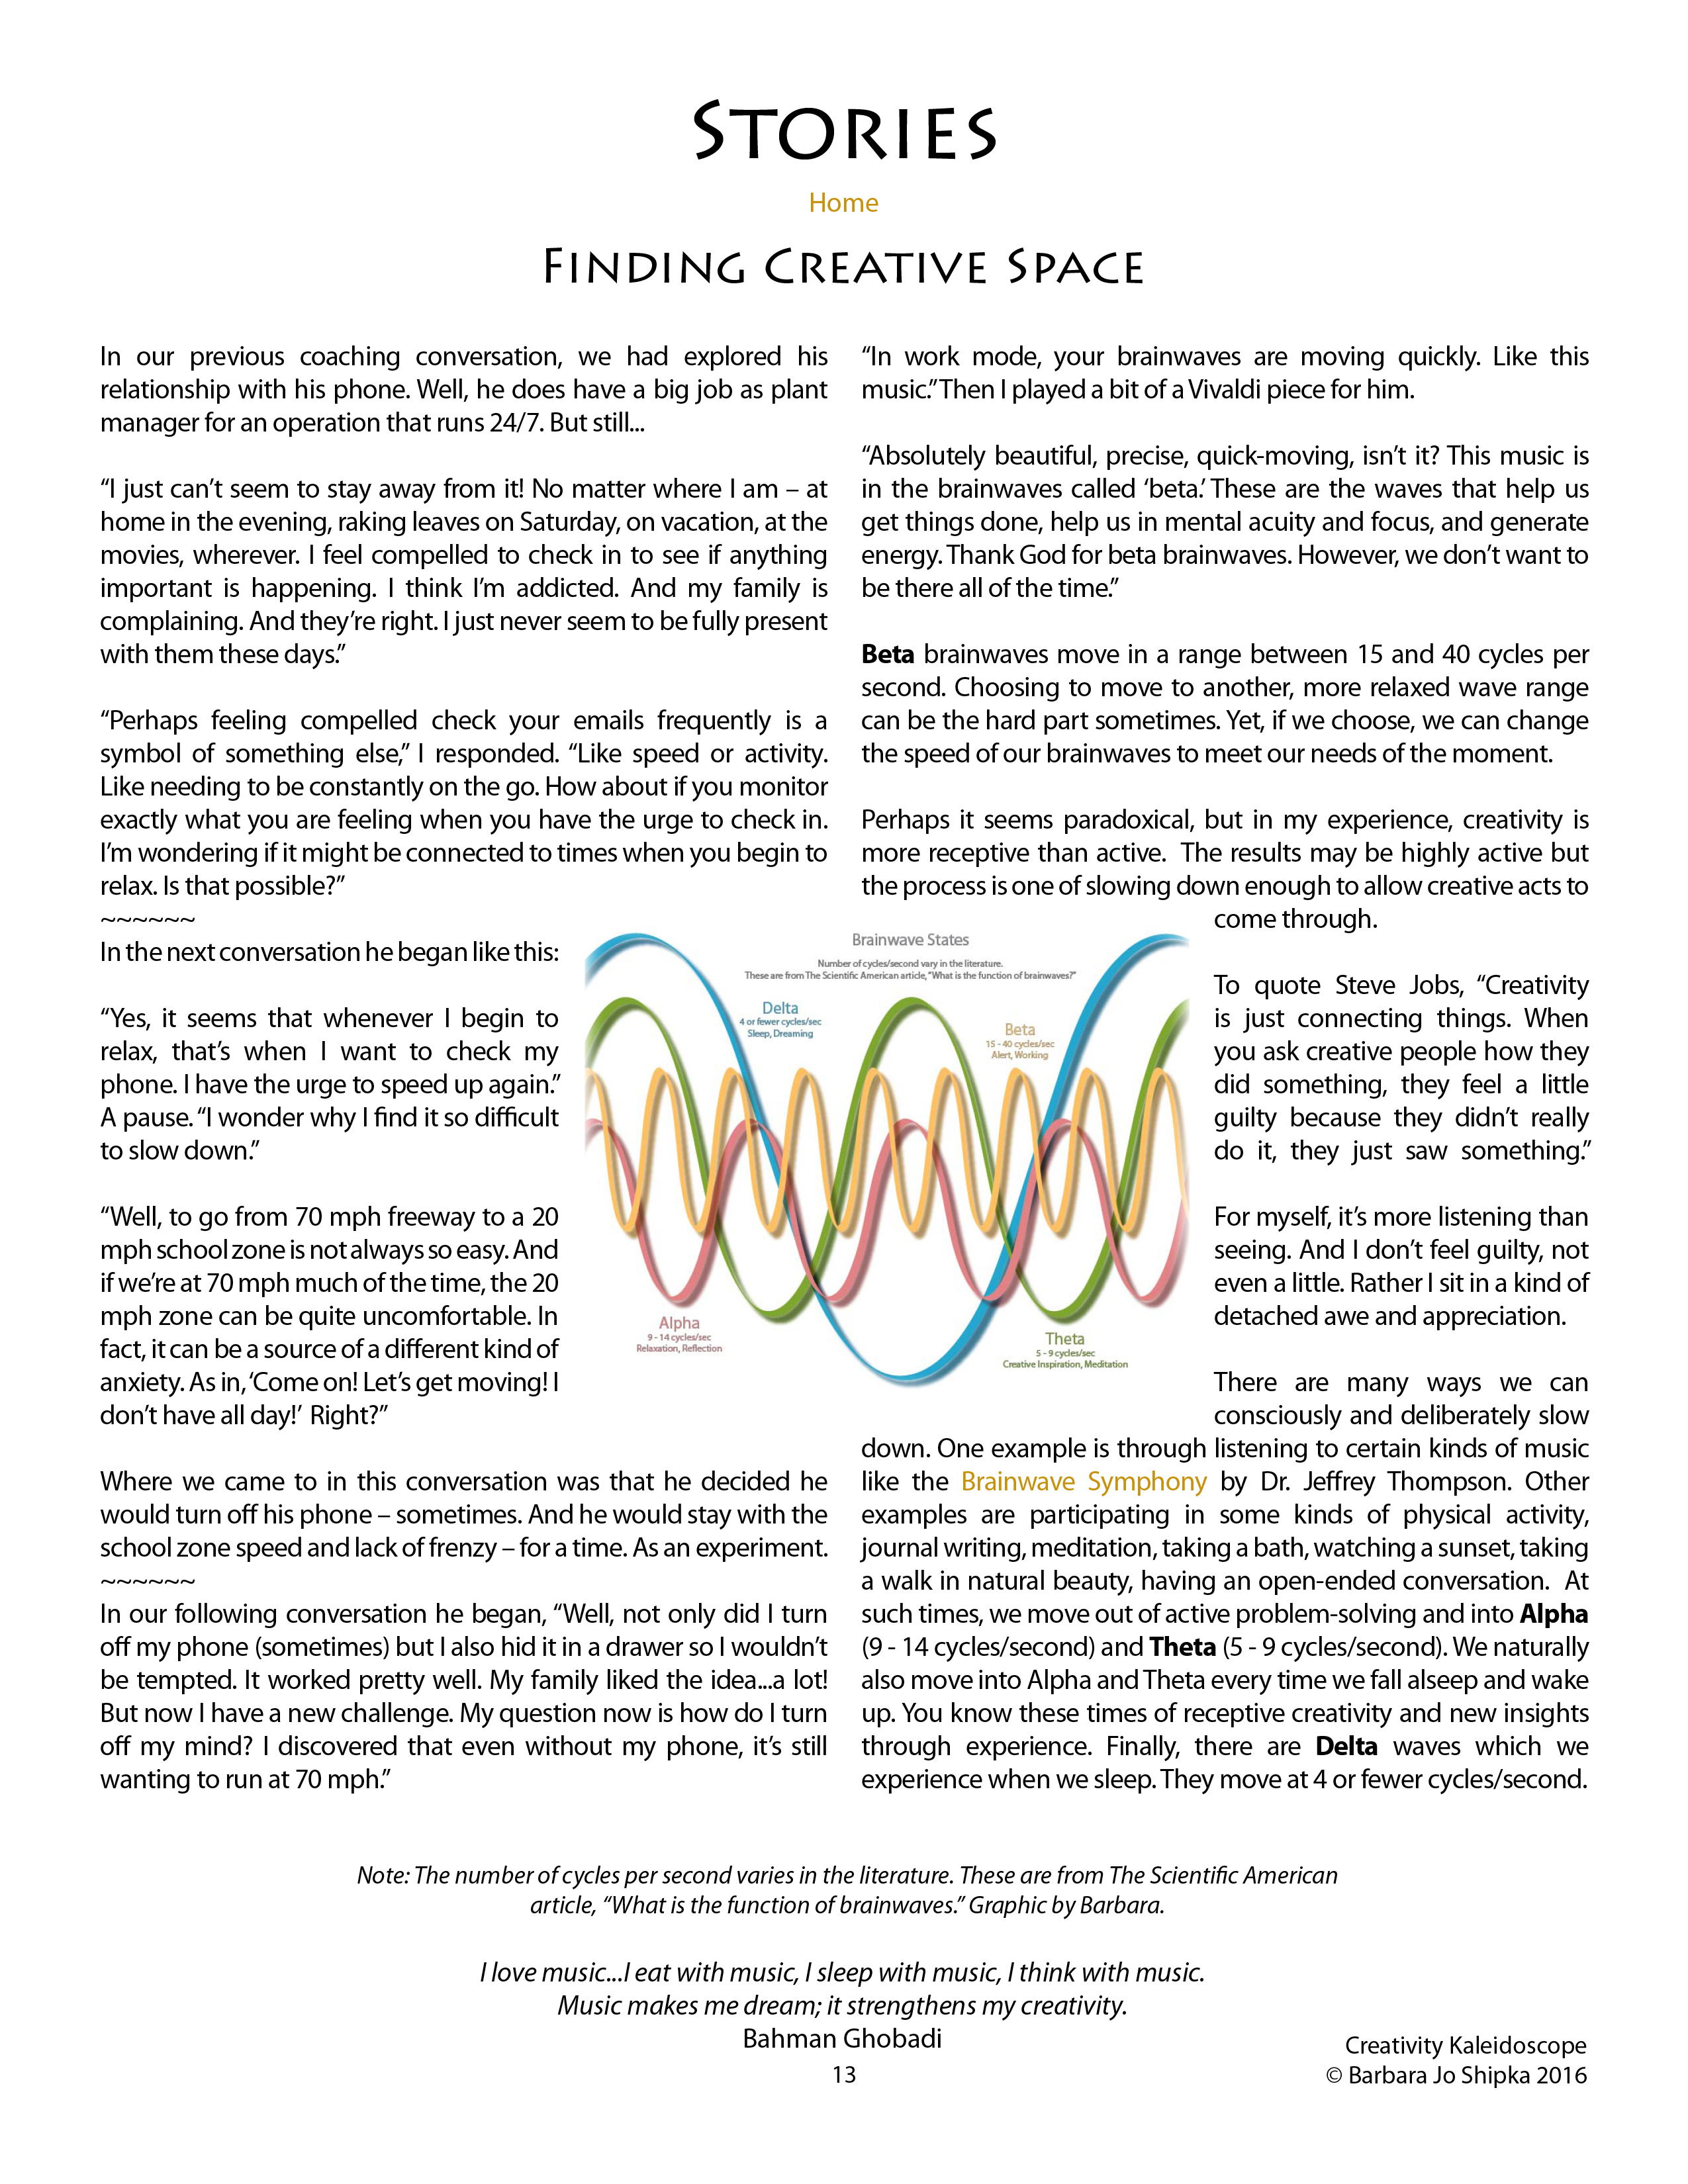 Finding Creative Space p 1313